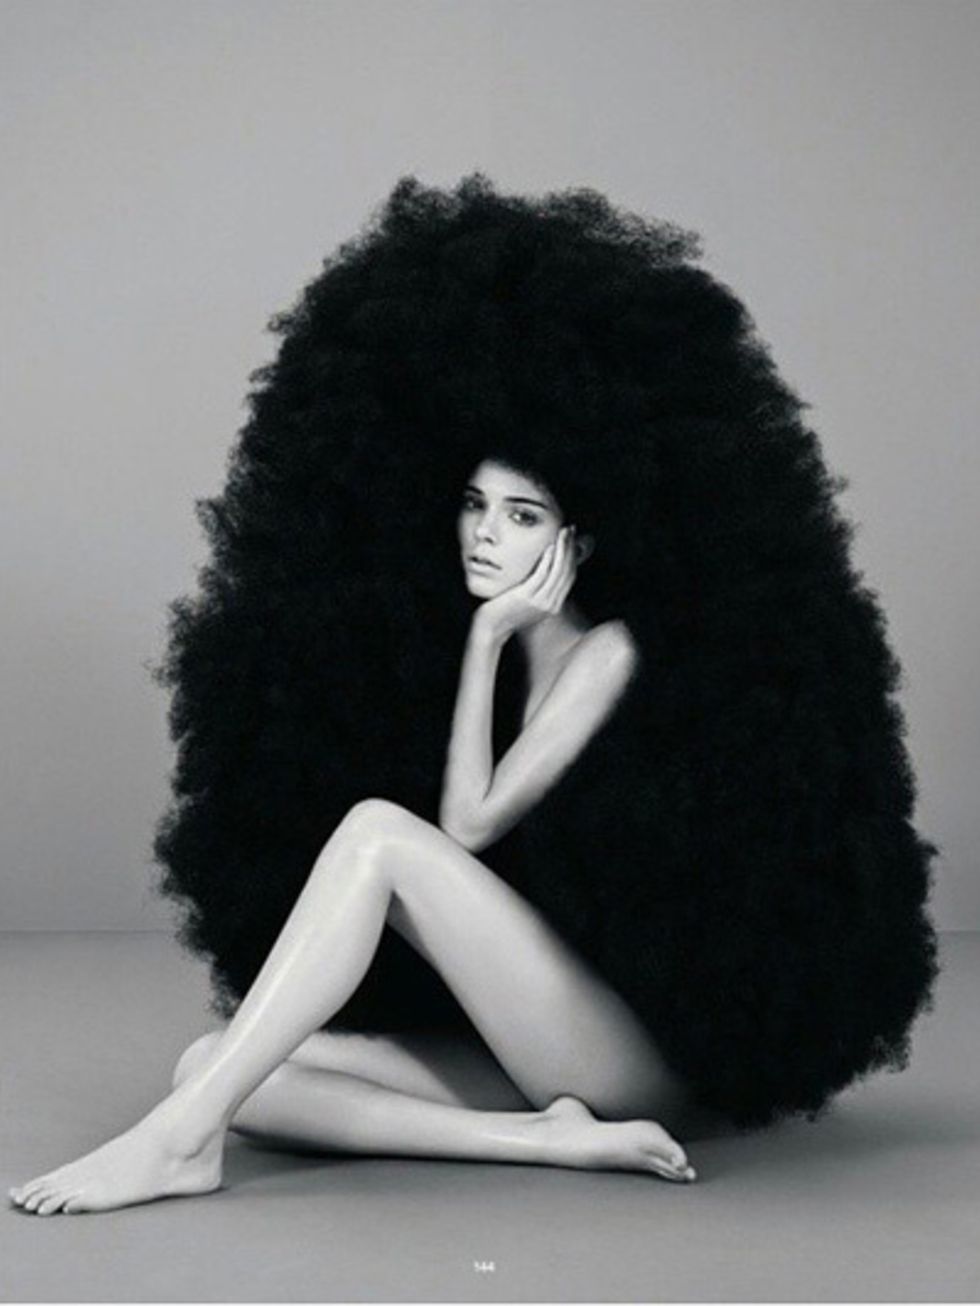 Hairstyle, Style, Sitting, Black hair, Fashion, Knee, Fur, Photography, Foot, Natural material, 